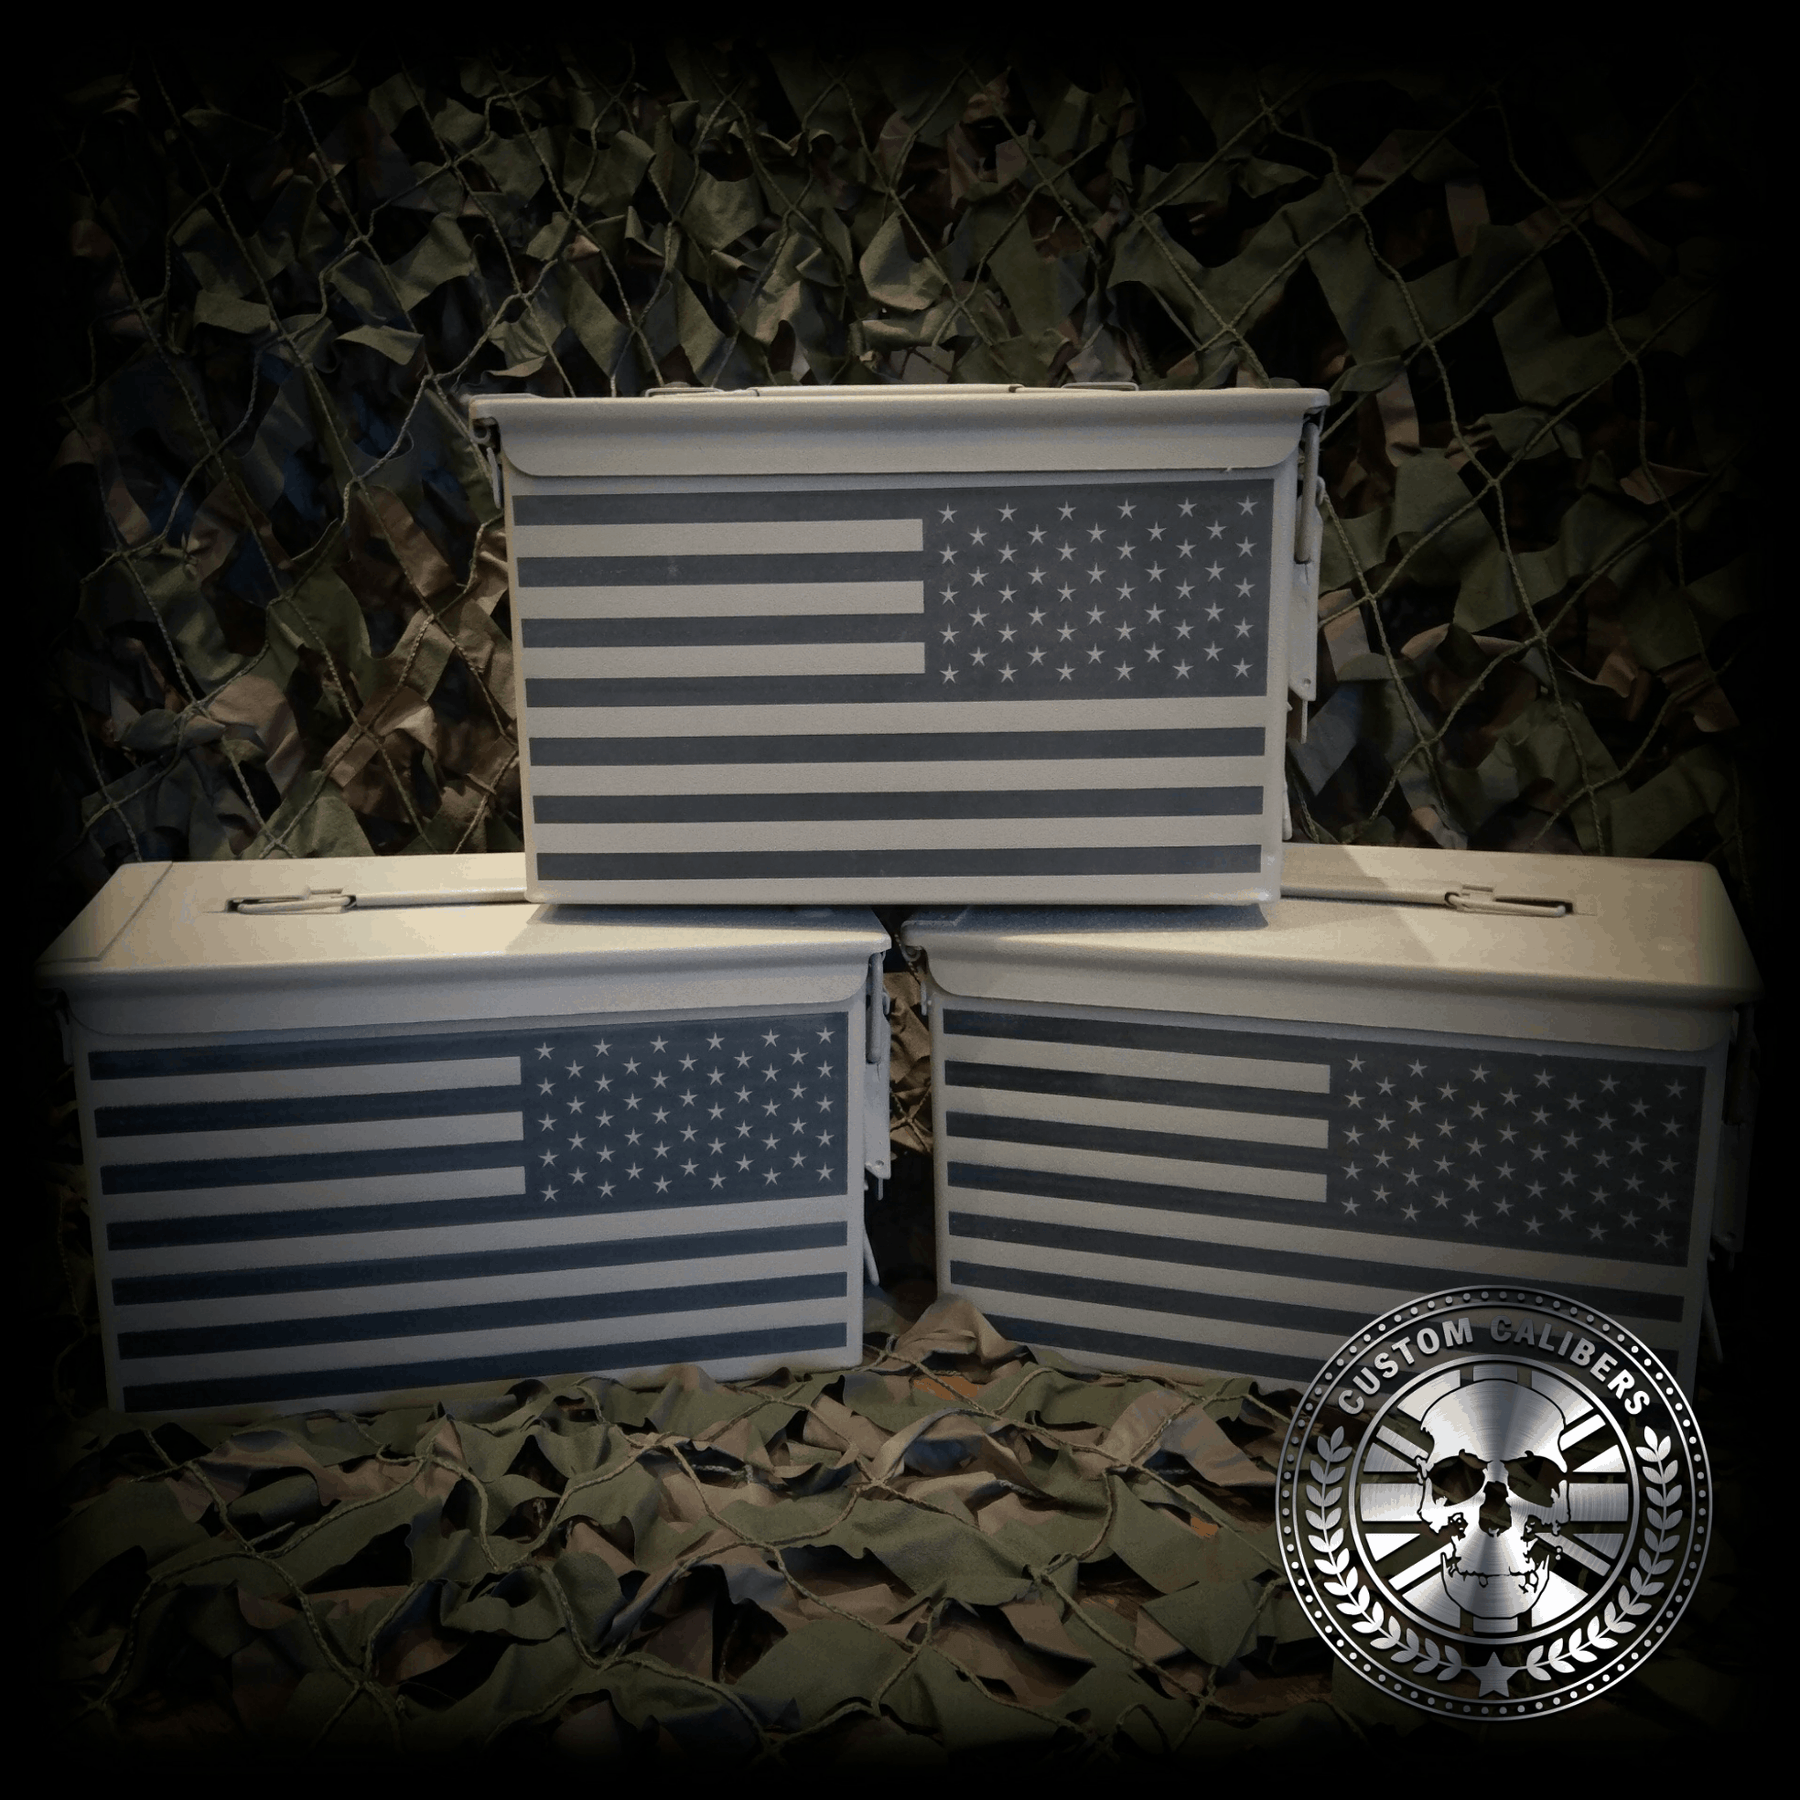 Another incredible image of three cases with american flag on them and the custom calibers logo at the bottom right